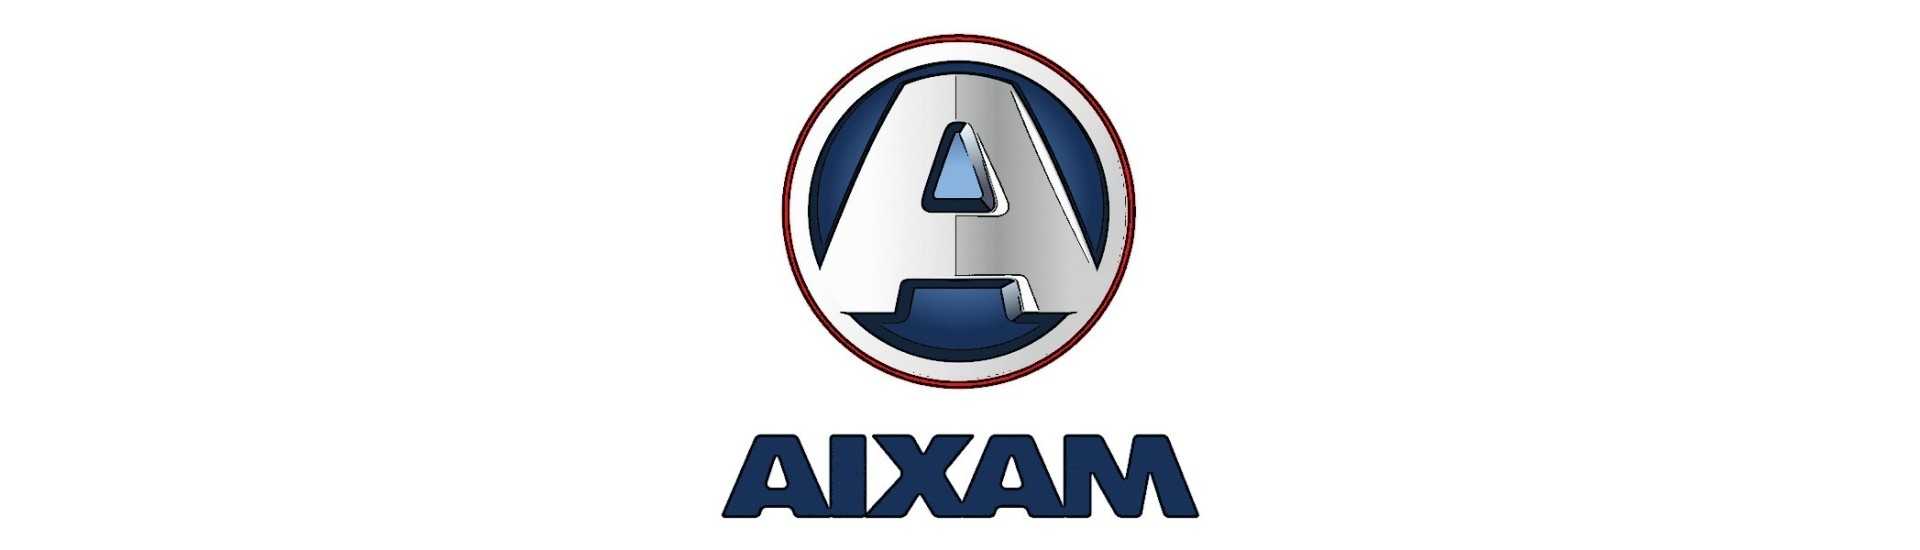 Best price counter cable for car without a permit Aixam